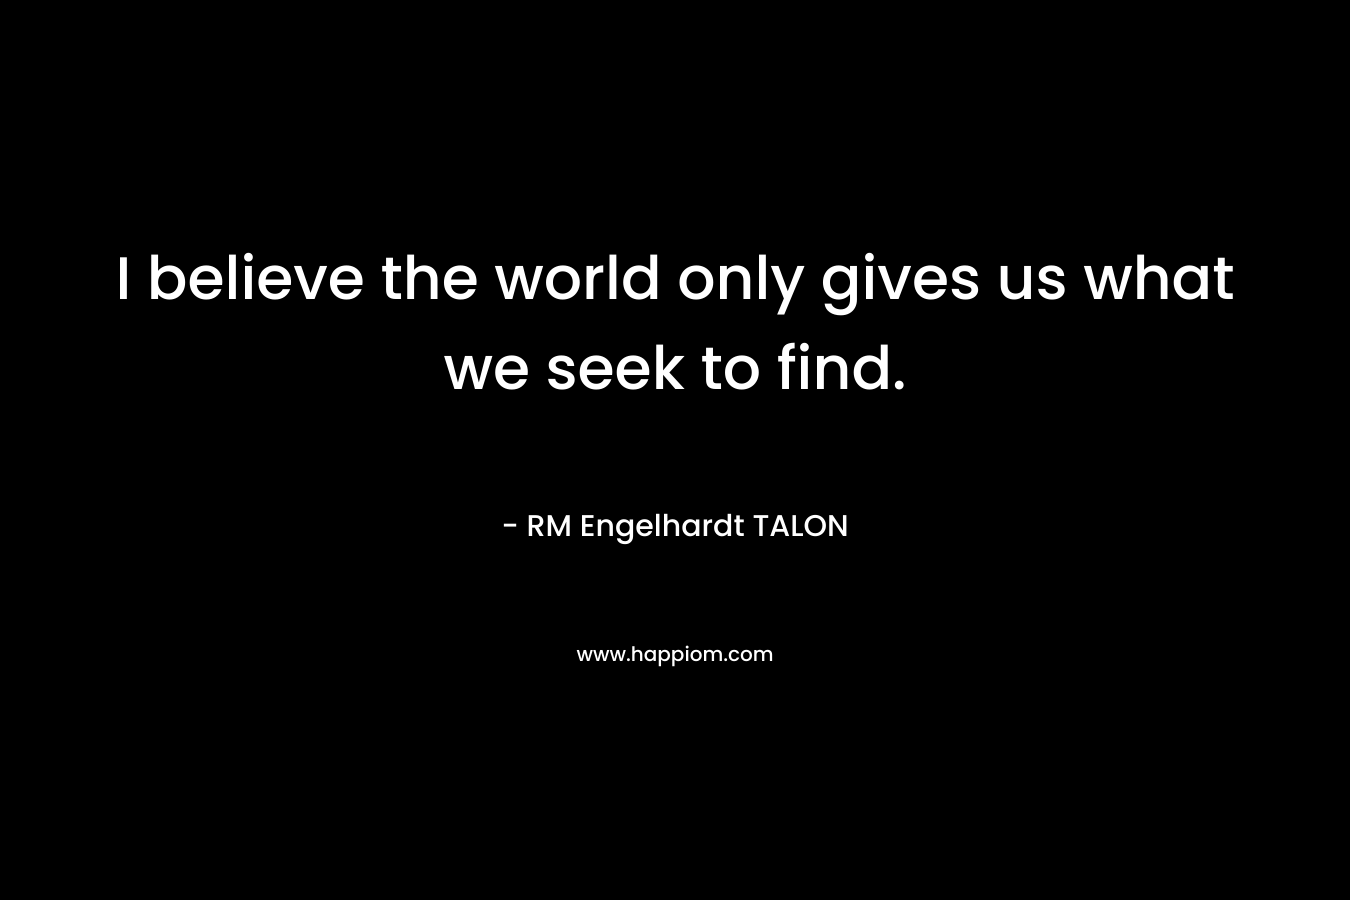 I believe the world only gives us what we seek to find. – RM Engelhardt TALON